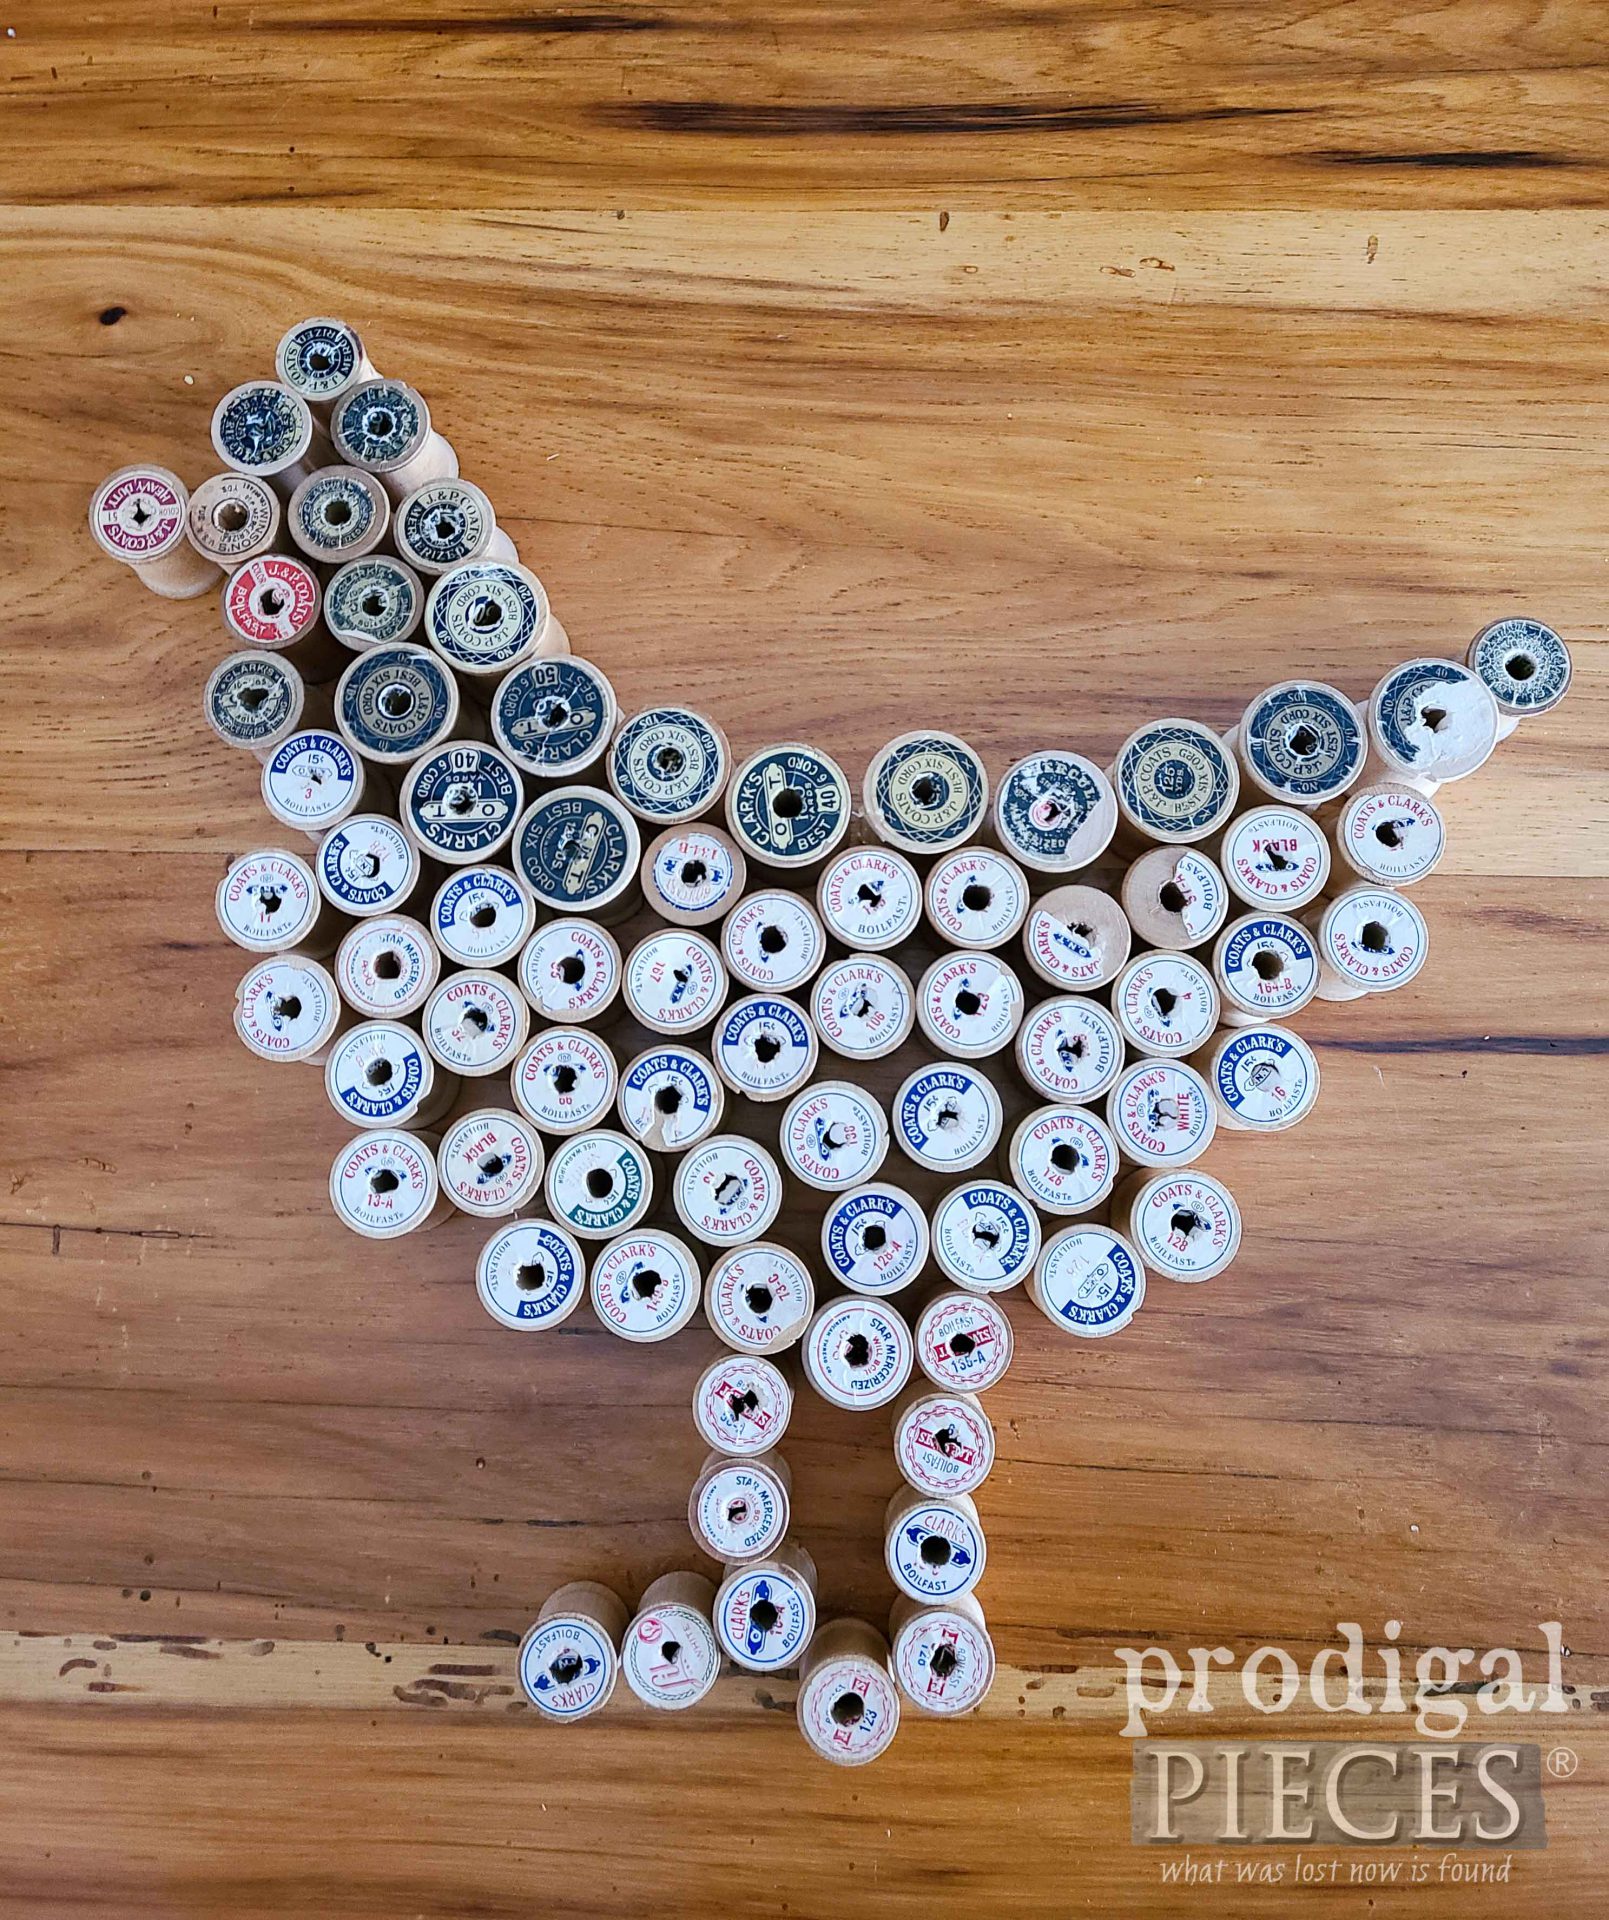 Upcycled Spool Chicken Dry Fit by Prodigal Pieces | prodigalpieces.com #prodigalpieces